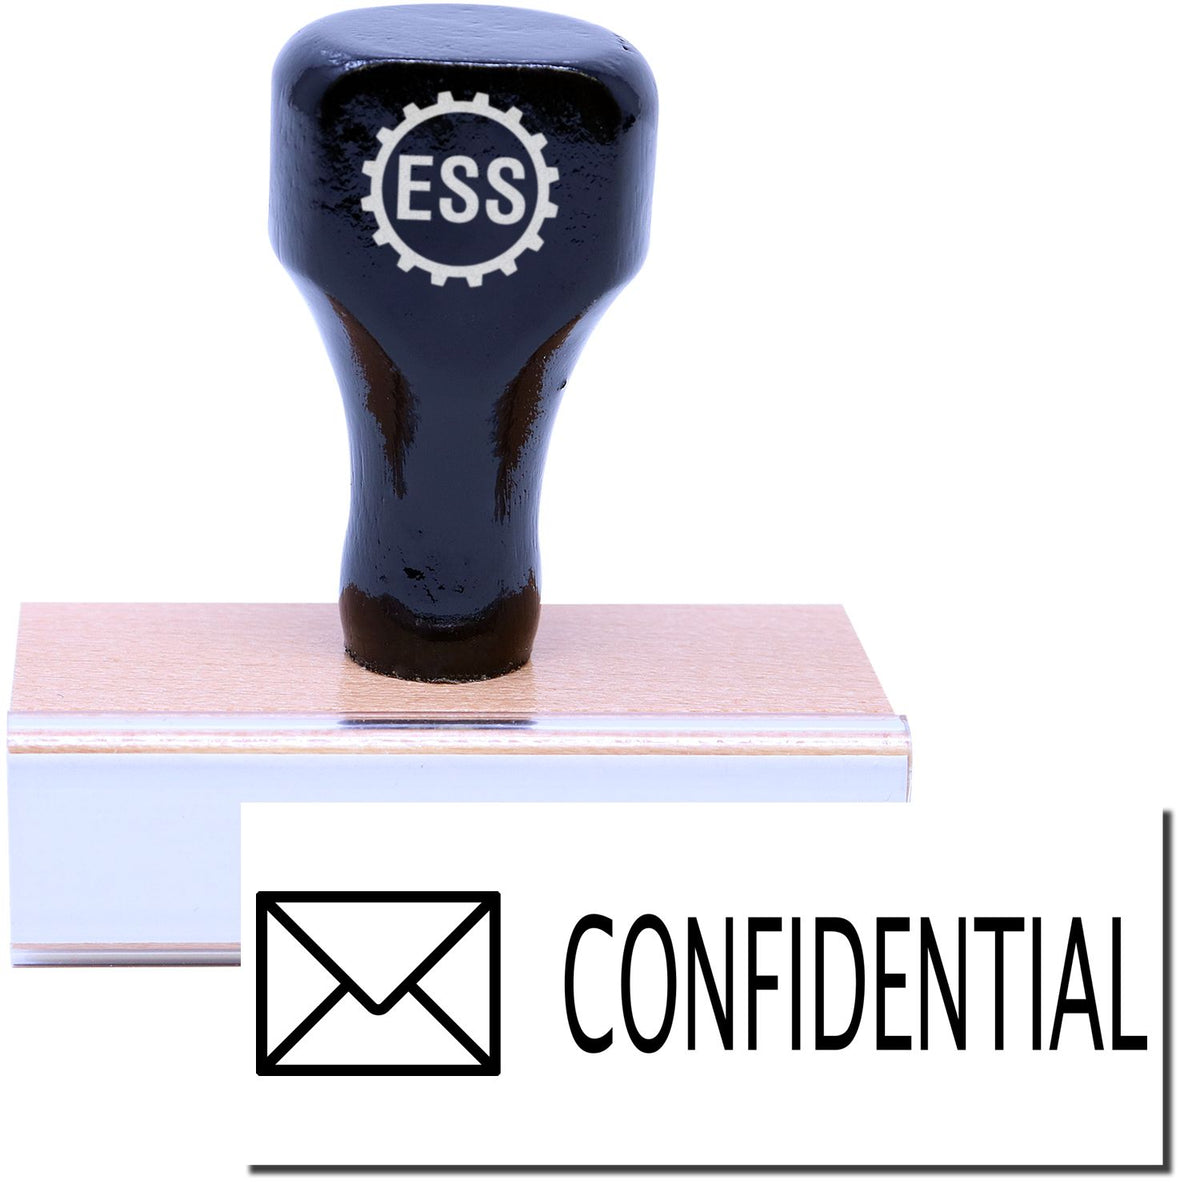 A stock office rubber stamp with a stamped image showing how the text &quot;CONFIDENTIAL&quot; in a large font with an image of an envelope on the left side is displayed after stamping.